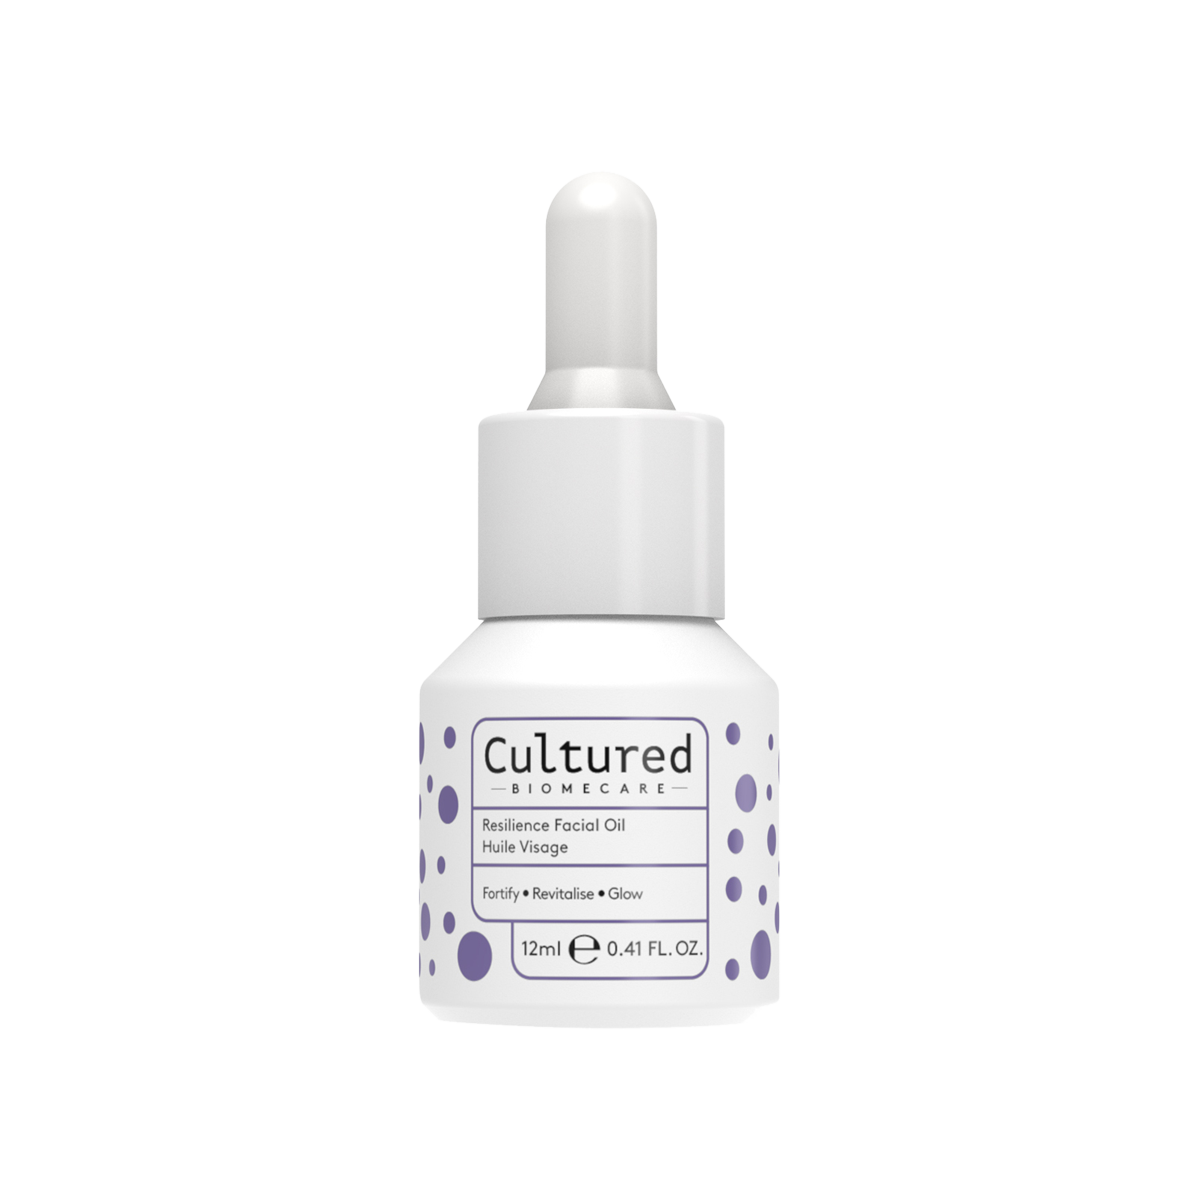 Cultured - Resilience Facial Oil